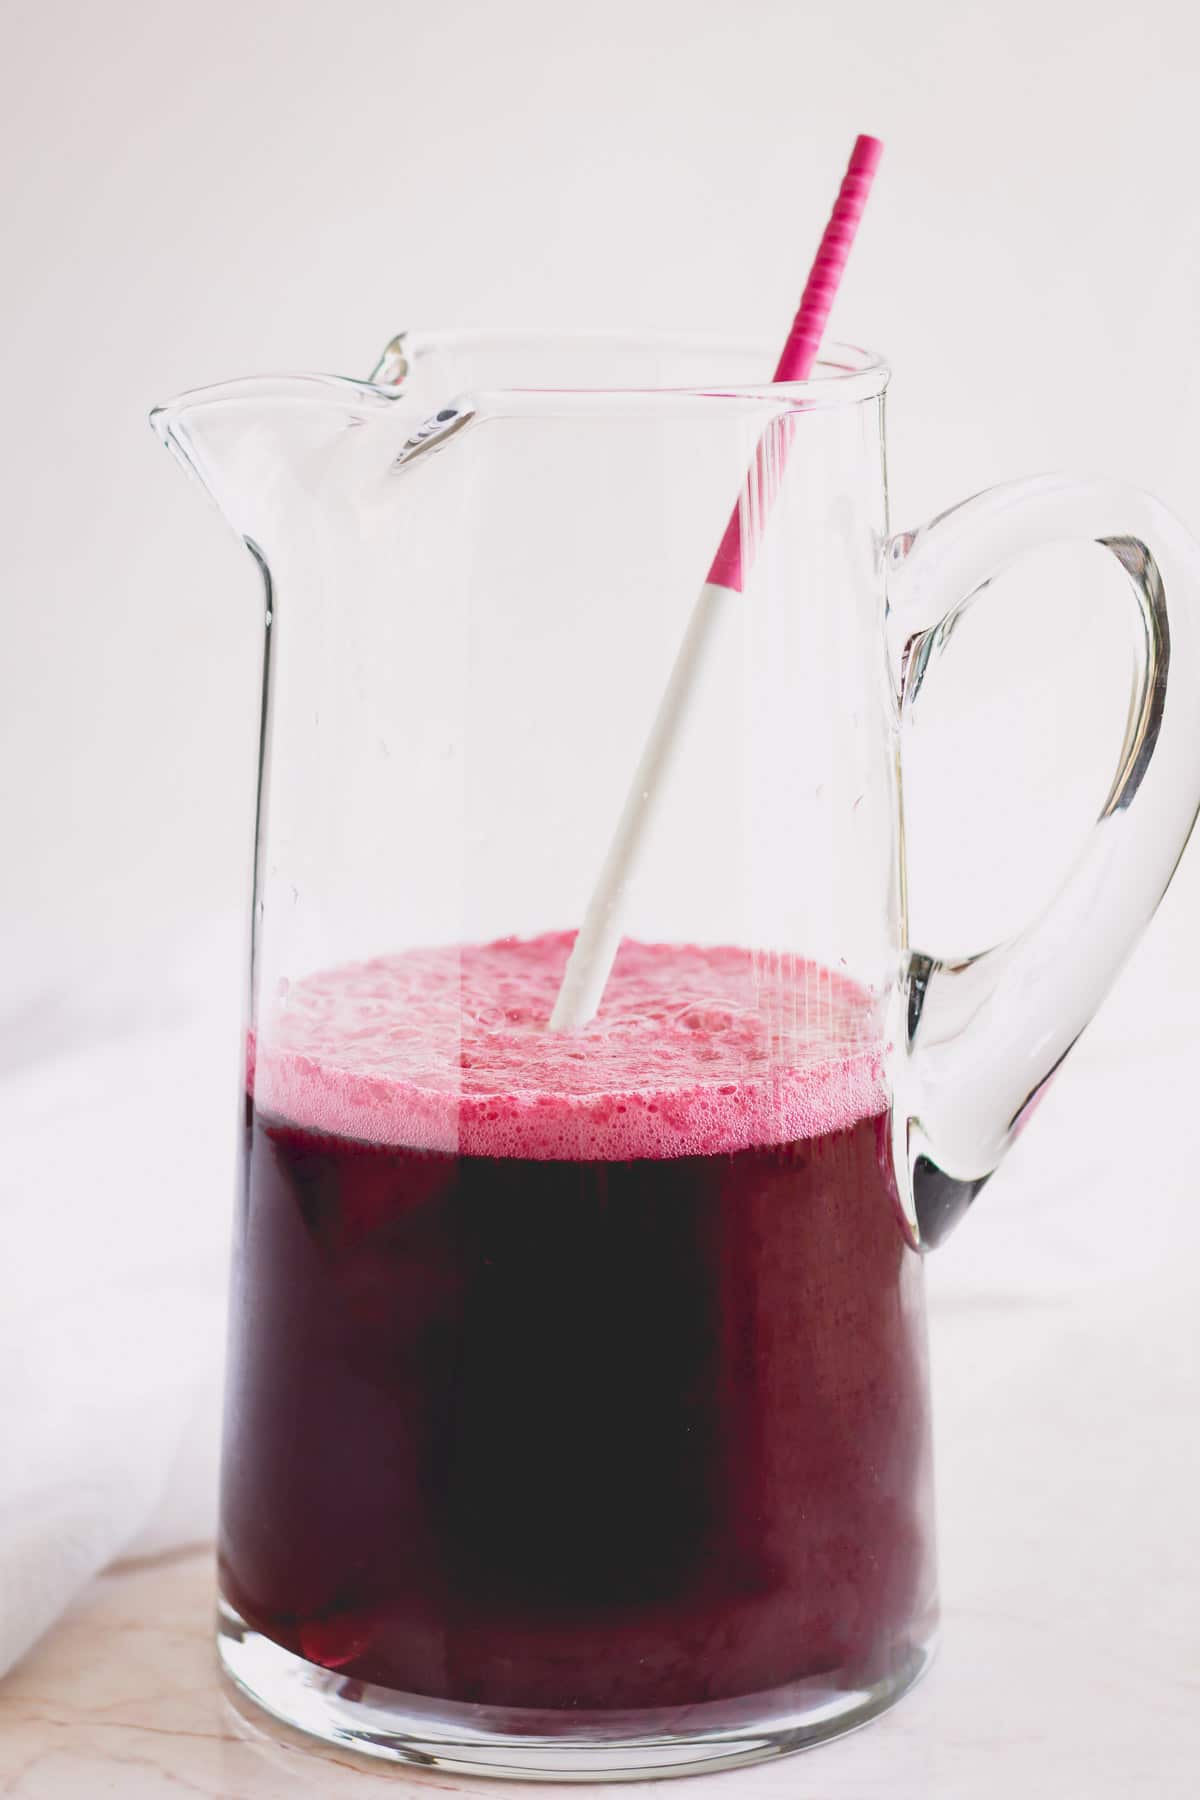 Large jug of blueberry lemonade with a long pink and white stirrer in it.